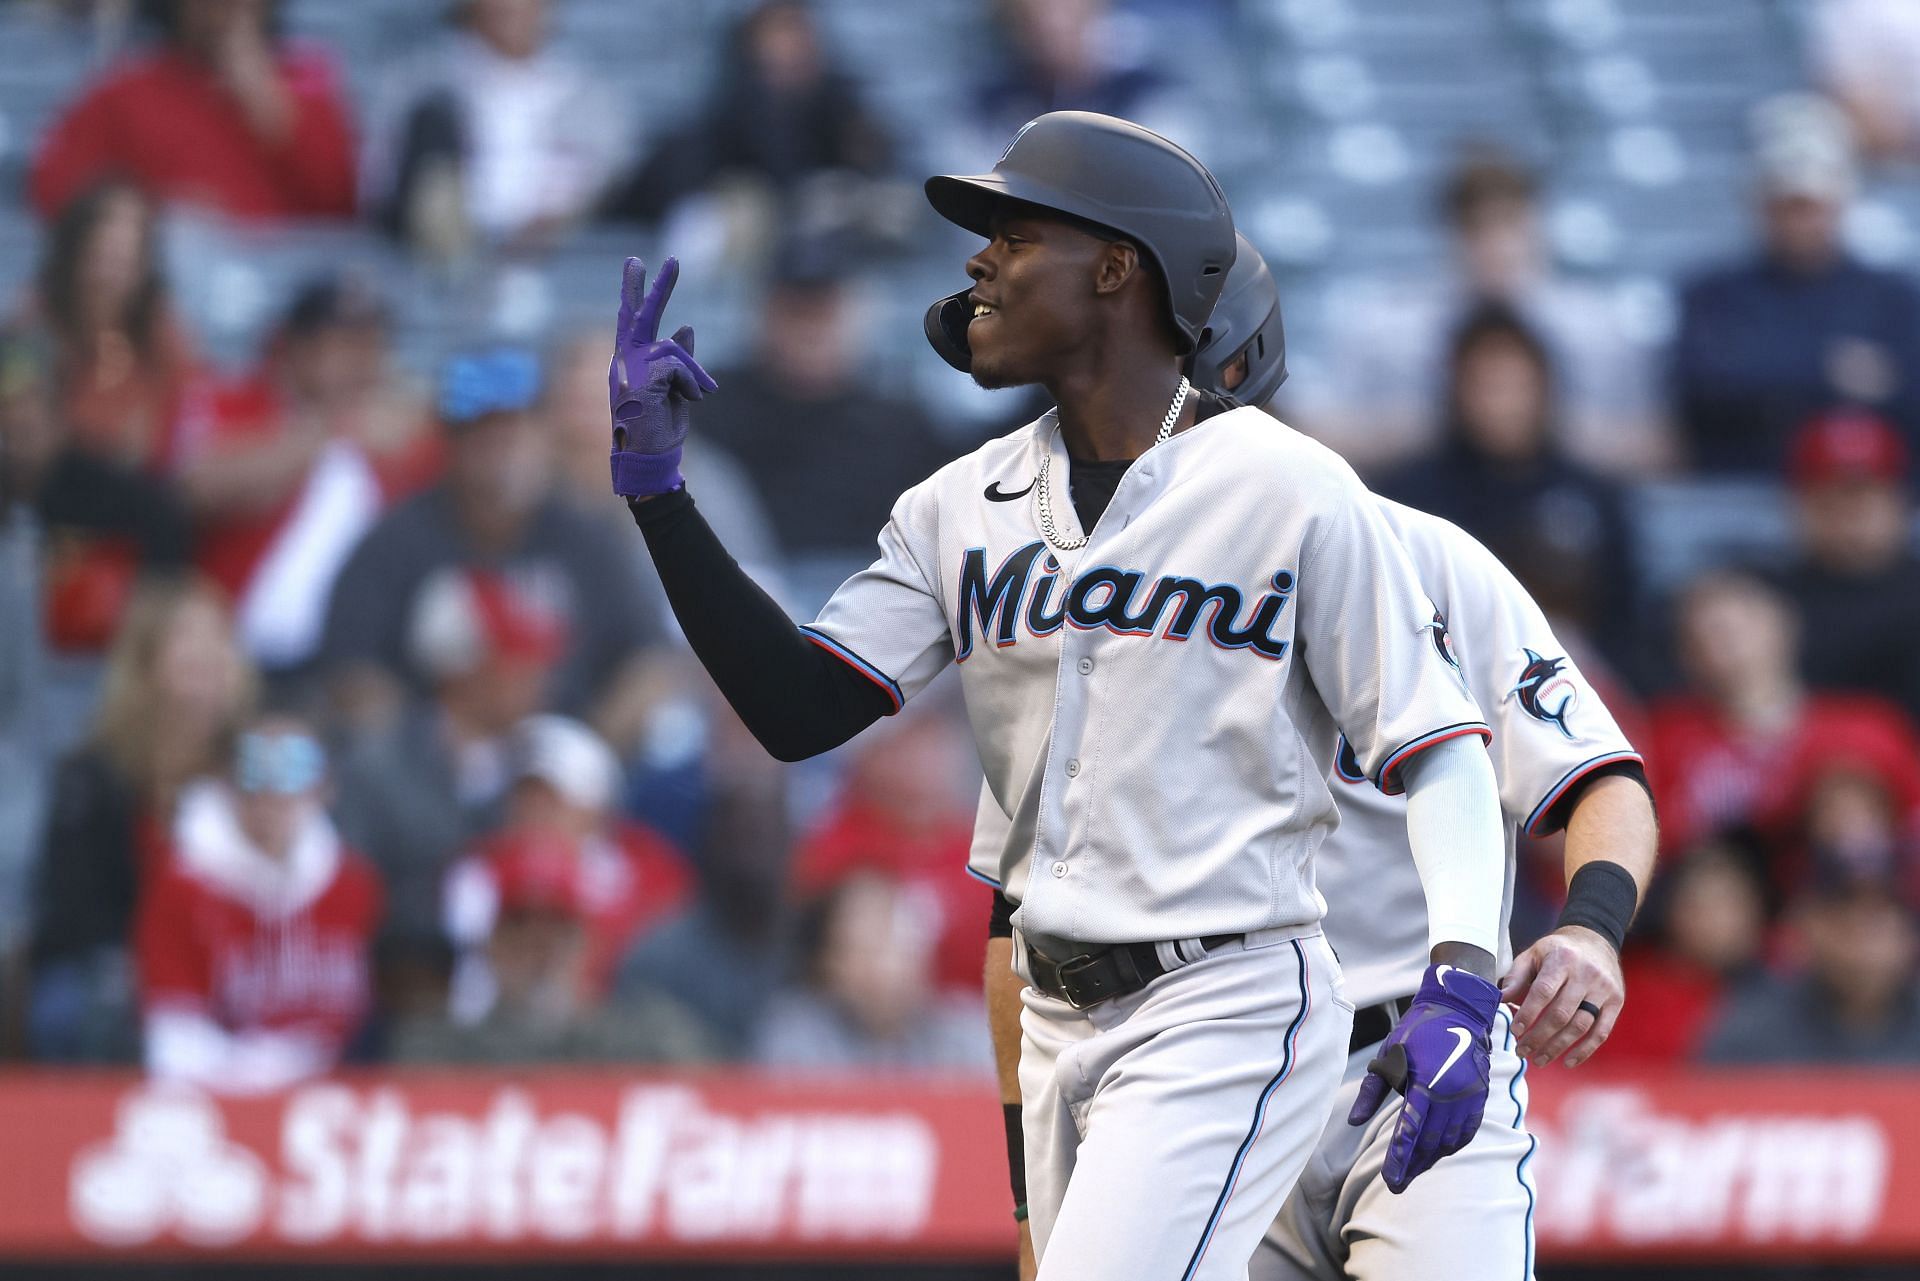 Marlins to move Jazz Chisholm to center field?